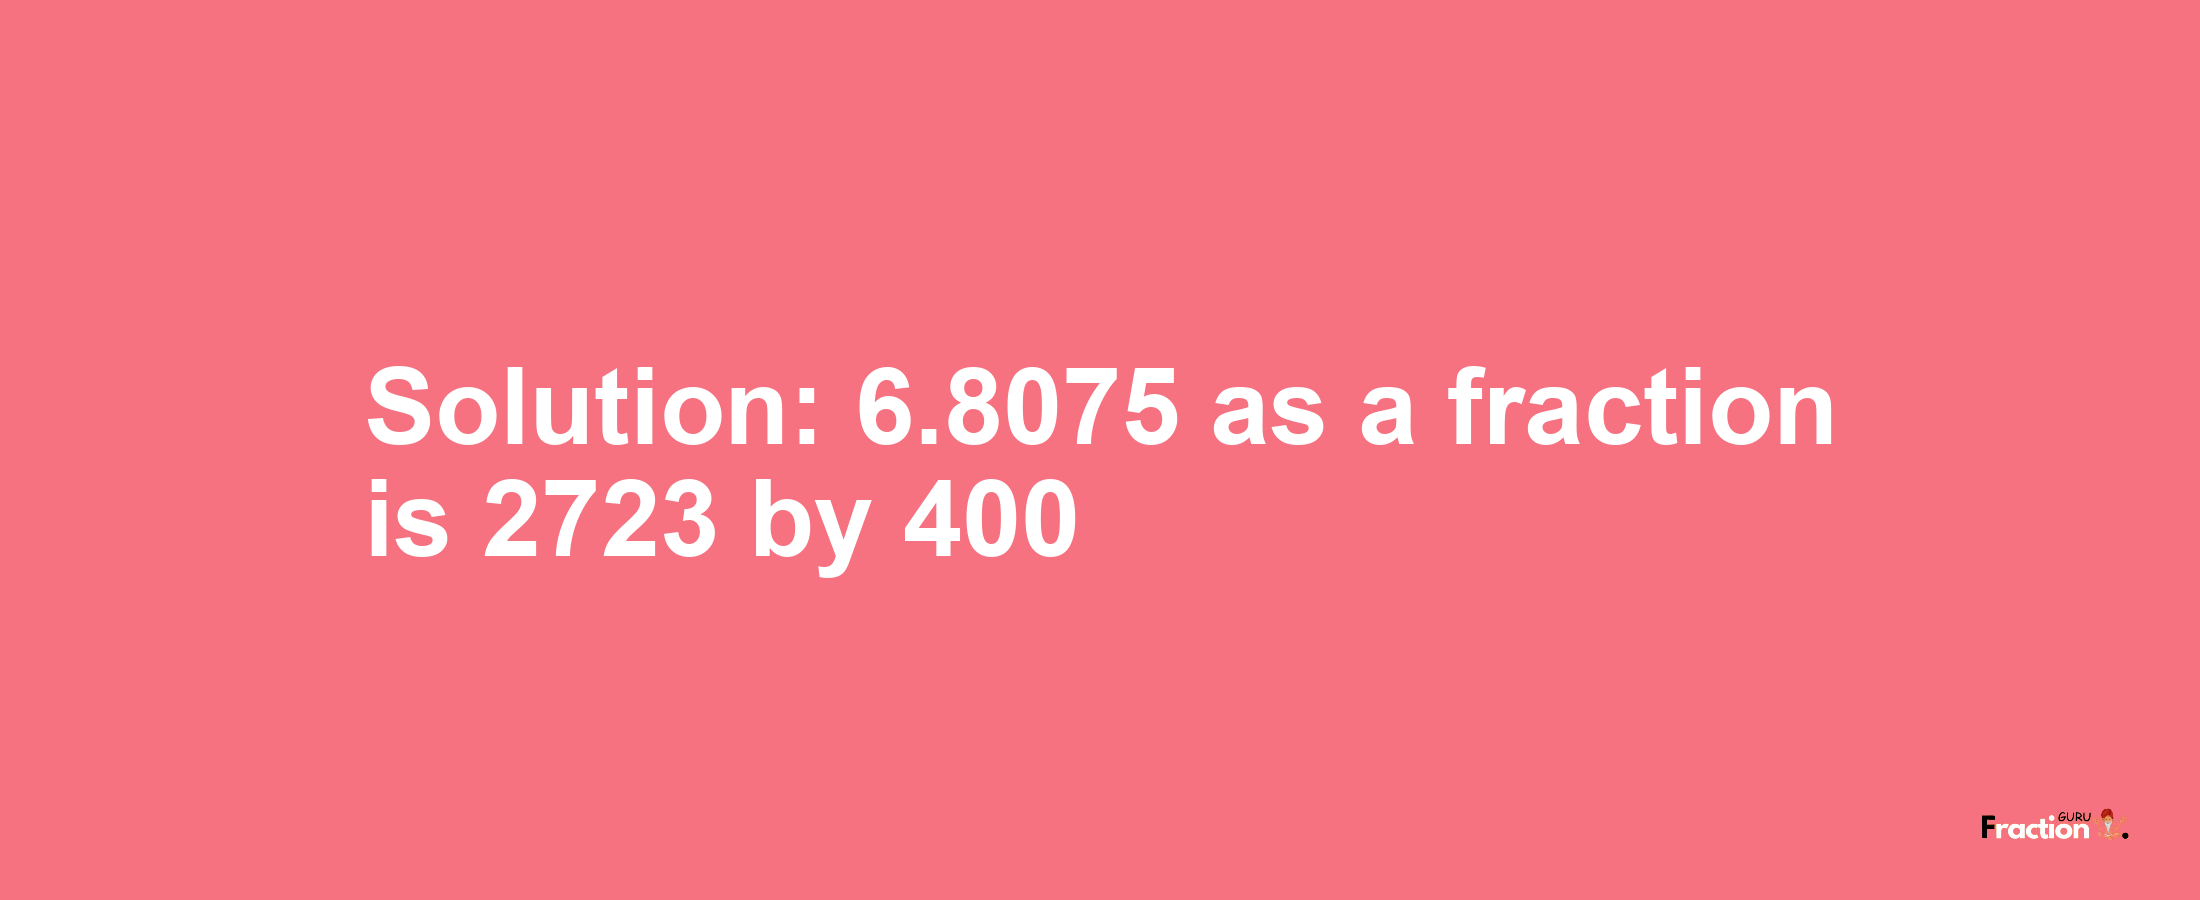 Solution:6.8075 as a fraction is 2723/400